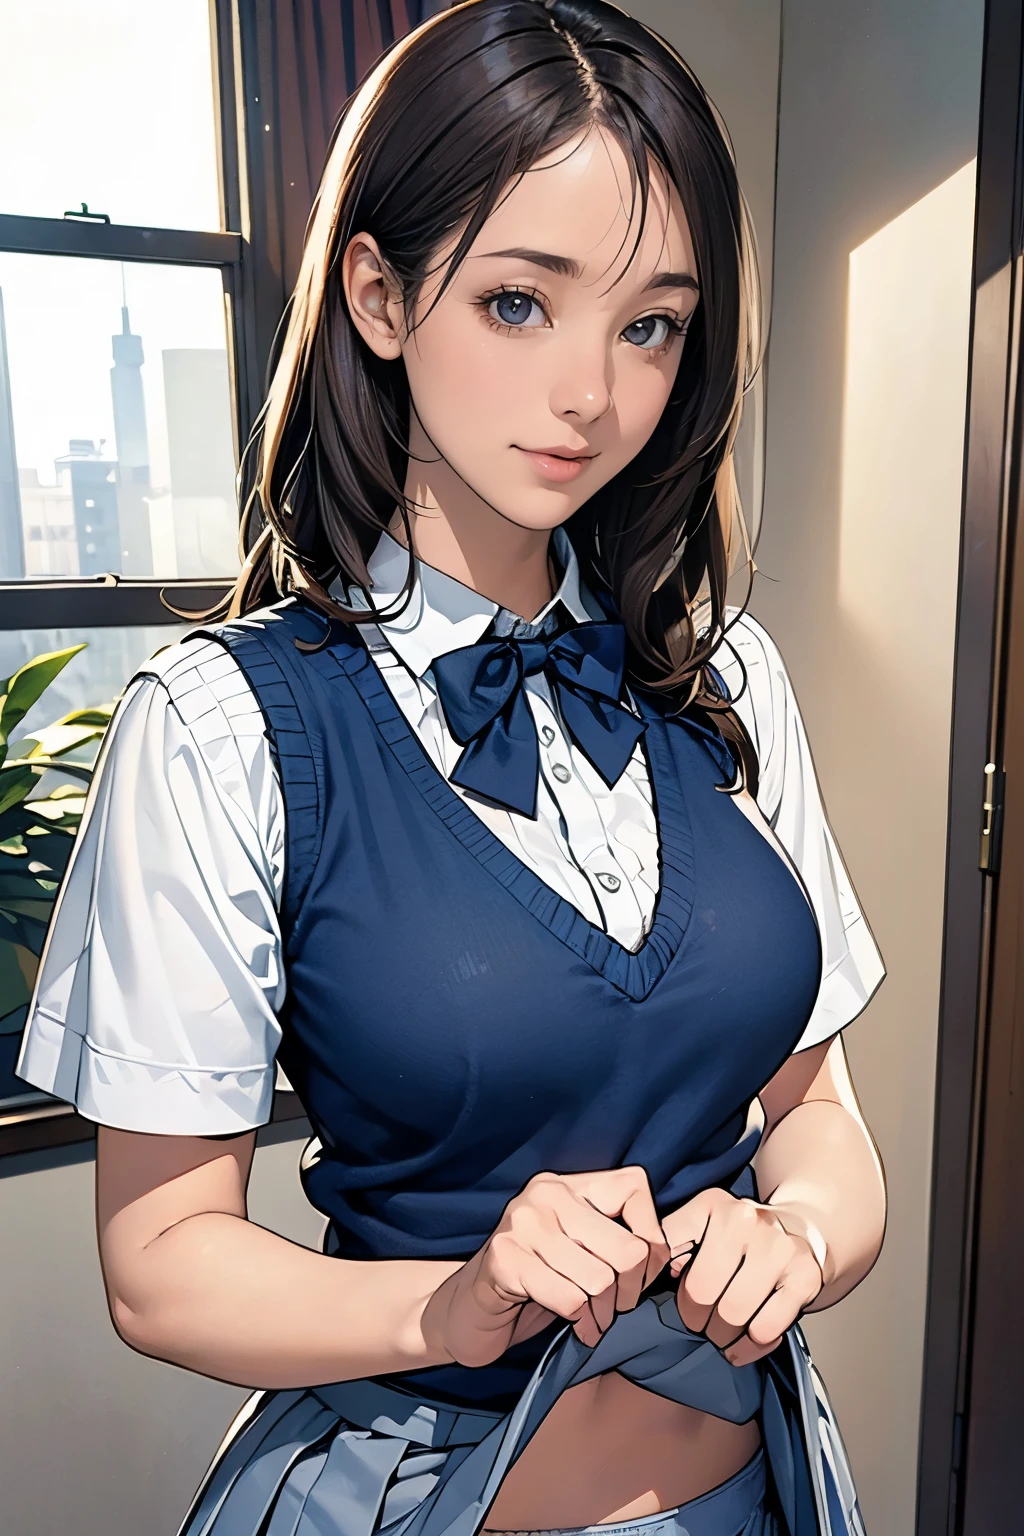 (masterpiece:1.2, highest quality), (realistic, photorealistic:1.4), beautiful illustrations, (natural side lighting, movie lighting), Depth of written boundary, 
looking at the viewer, (face focus, Upper body), Front view, 1 girl, English, high school girl, 15 years old, perfect face, Cute symmetrical face, shiny skin, 
(random hairstyles、blonde), Big eyes, long eyelashes chest), thin, tall、
beautiful hair, beautiful face, fine and beautiful eyes, beautiful clavicle, beautiful body, beautiful breasts, beautiful thighs, beautiful feet, beautiful fingers, 
((fine fabric texture, Brown knitted vest, short sleeve white collar shirt, navy pleated skirt, Navy bow tie)), 
(beautiful scenery), evening, (Inside the flower shop), Are standing, (smile, Upper grade, open your mouth),  (((skirt lift, I can see your panties)))